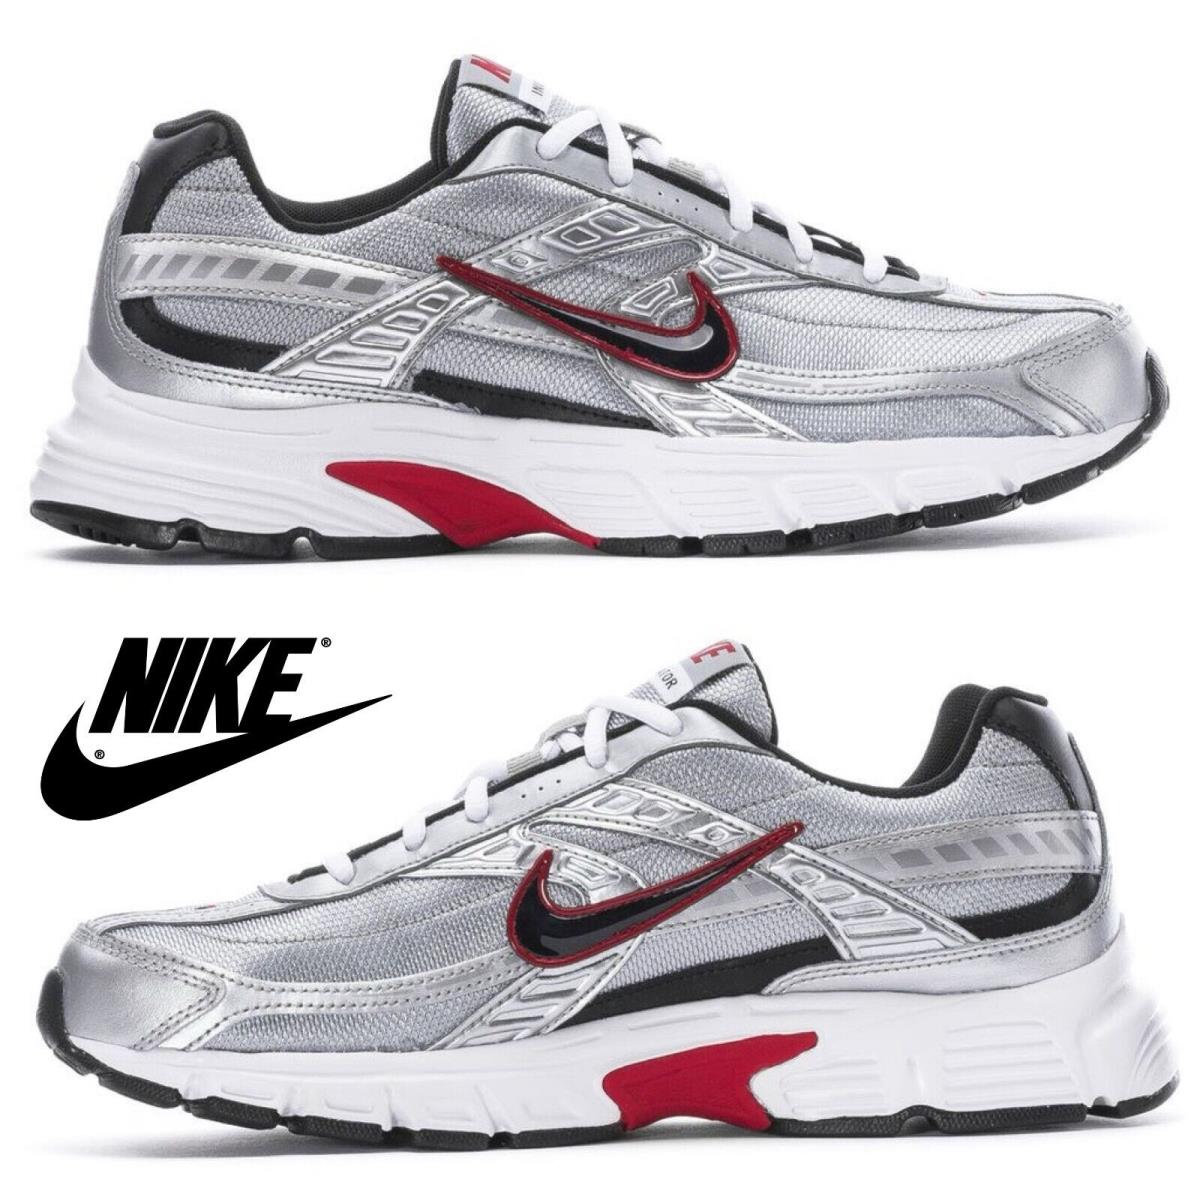 Nike Men`s Initiator Running Shoes Training Athletic Sport Casual Sneakers Gray